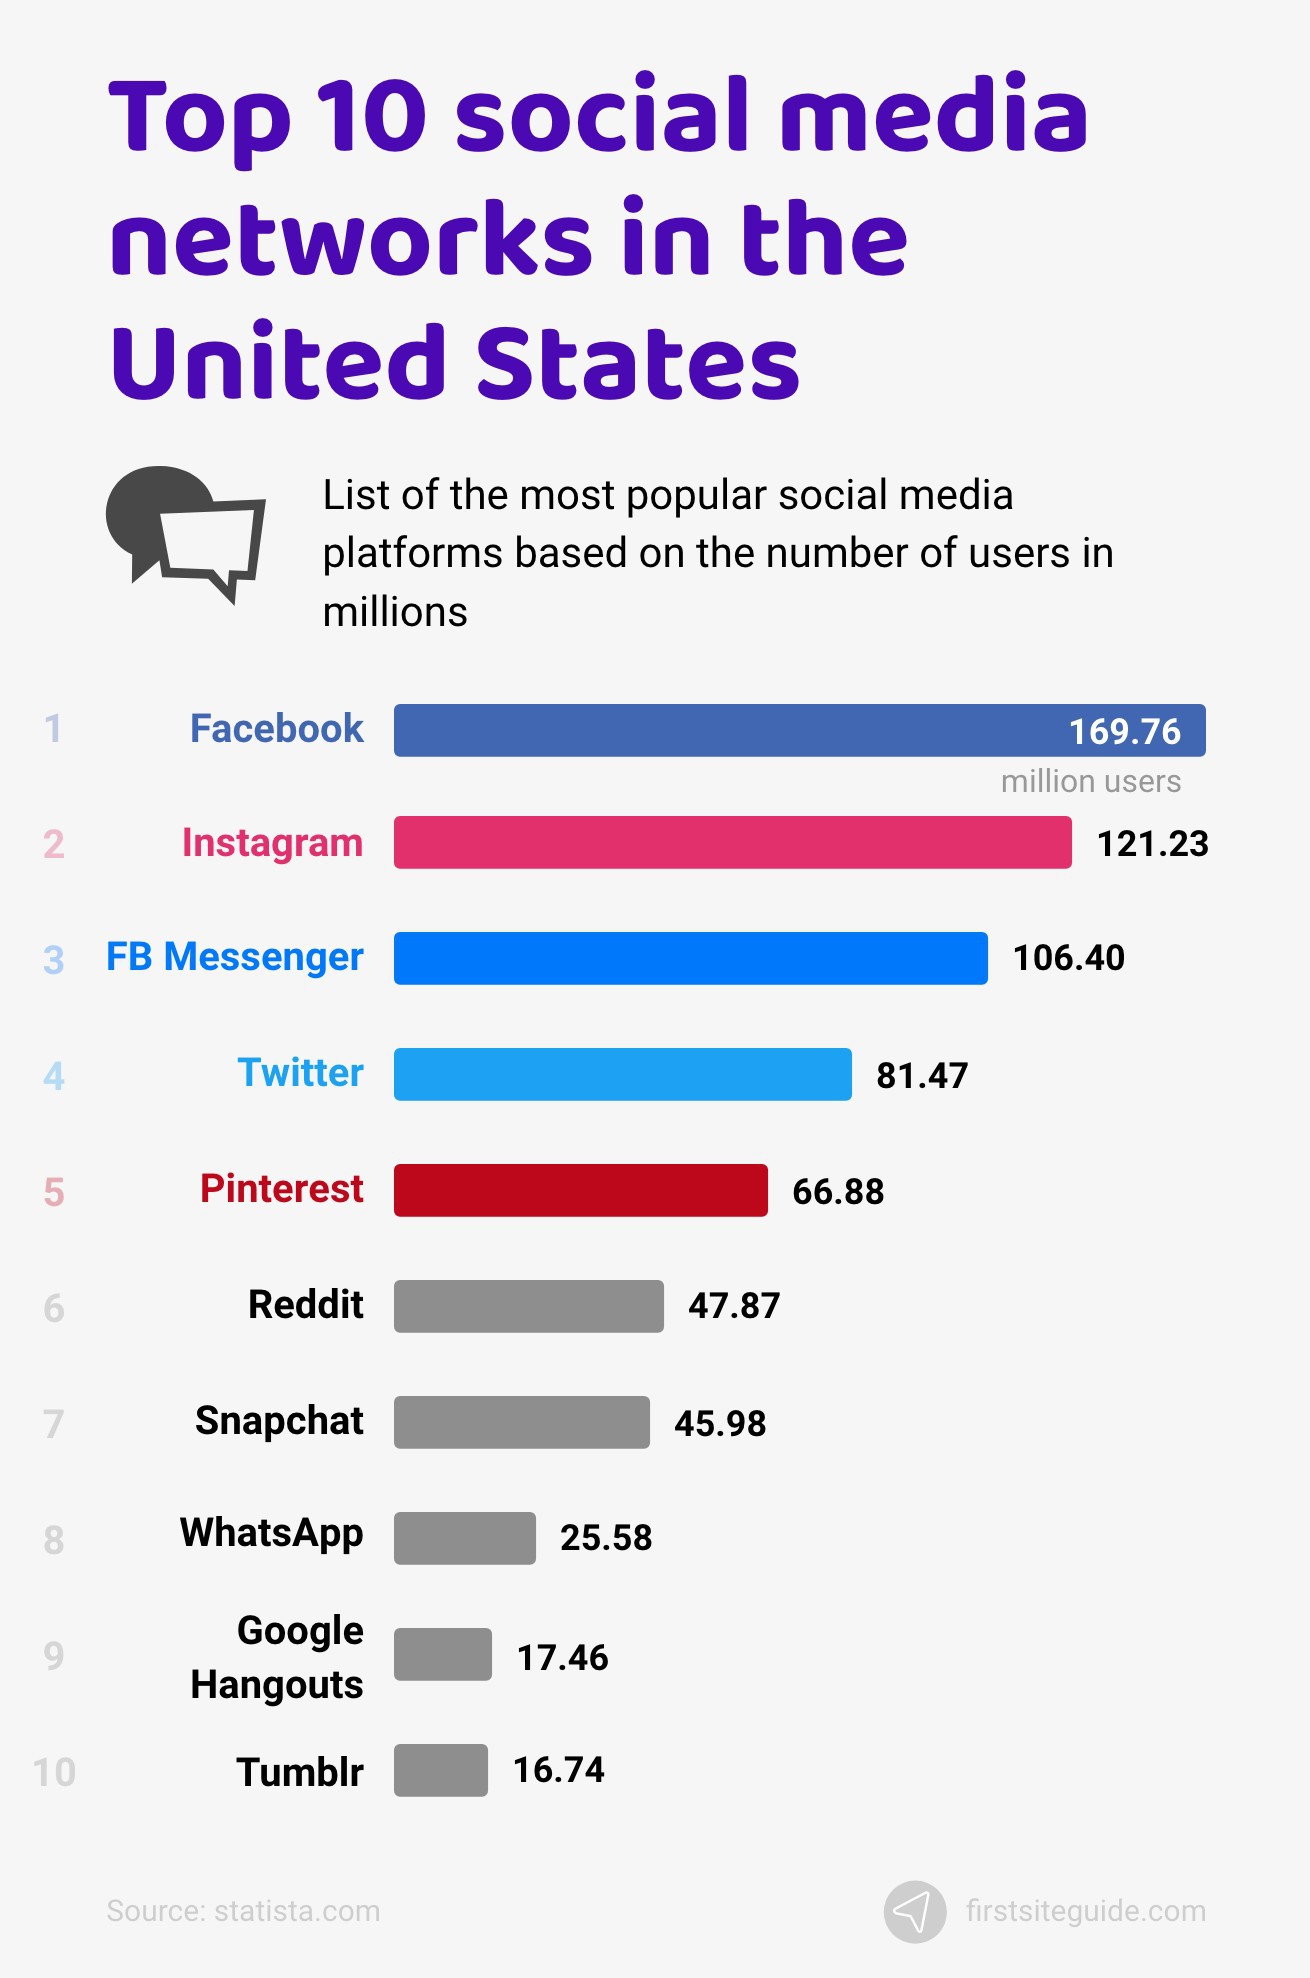 Top 10 social media networks in the United States